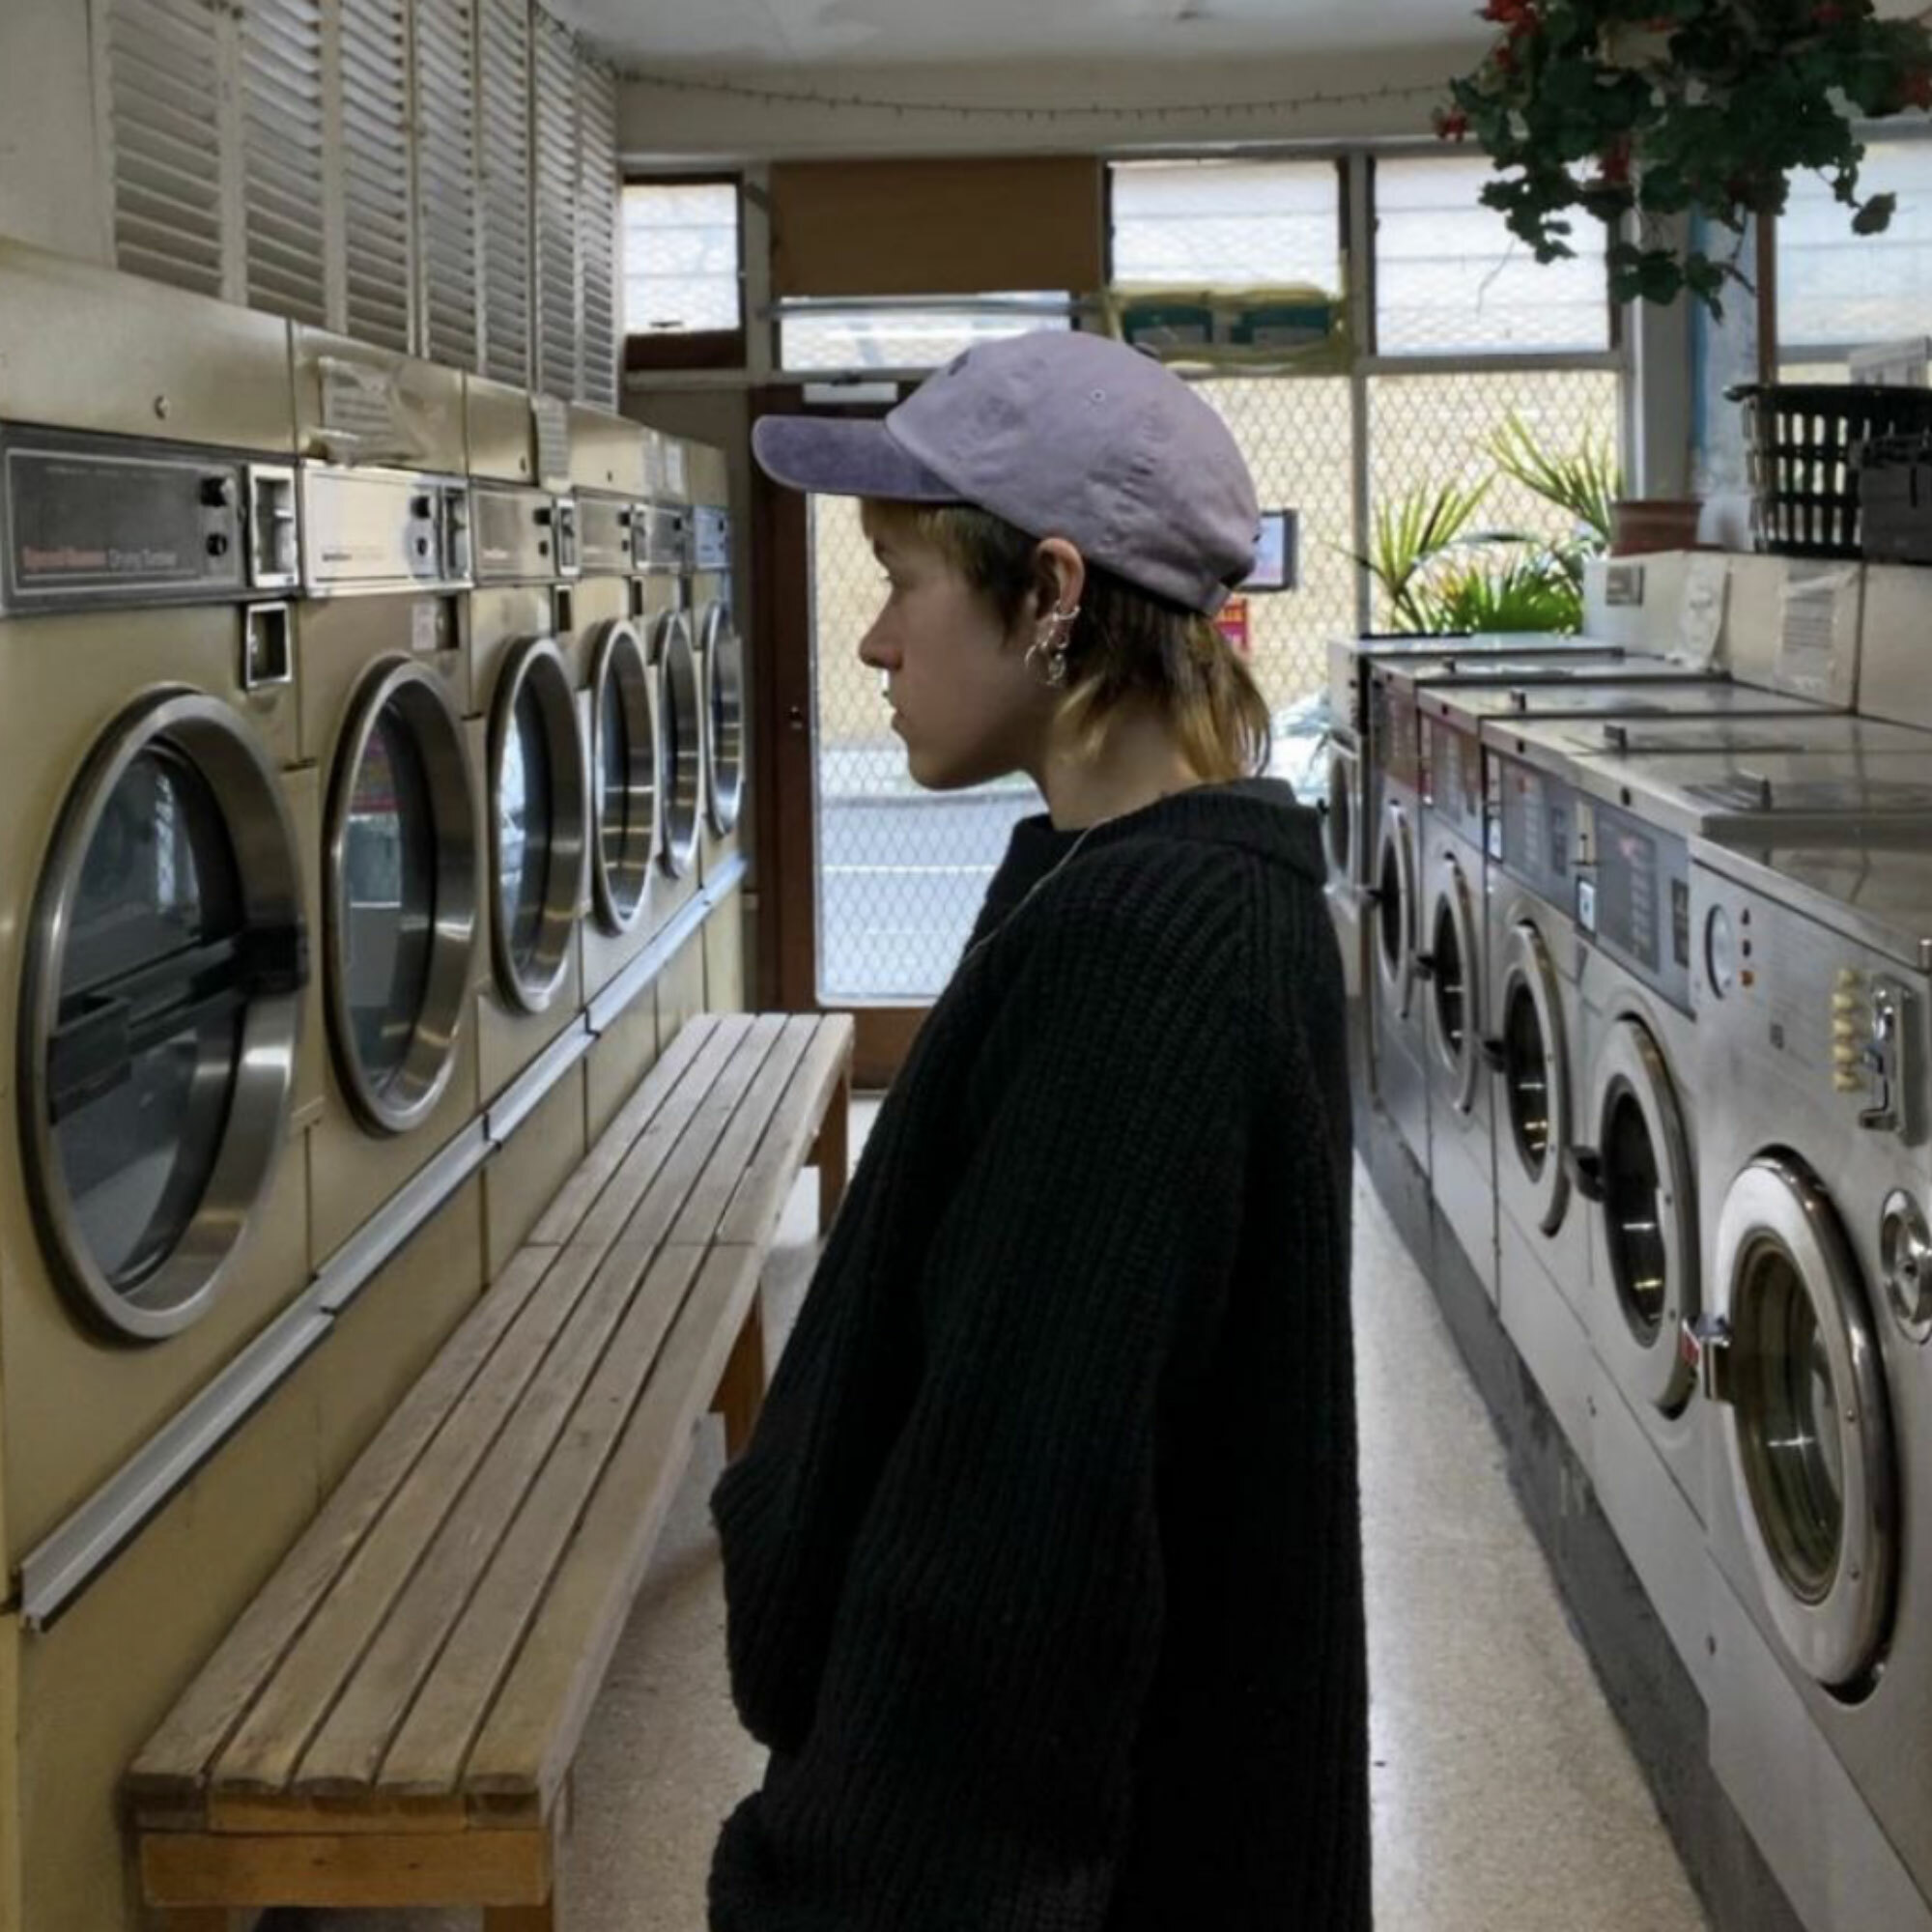 A person stands gazing at washing machines in a laundromat.